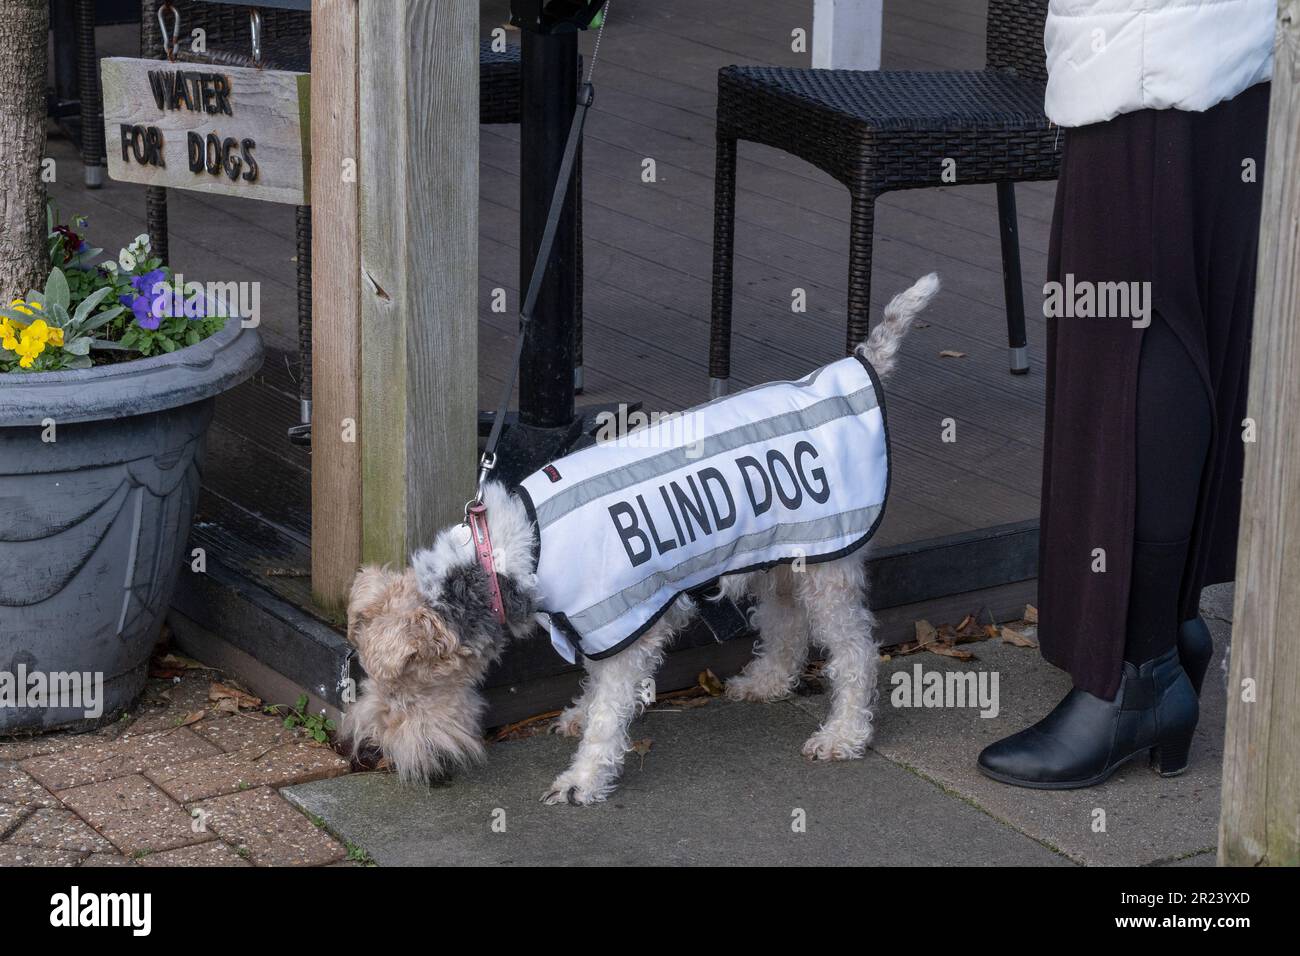 A blind dog on a lead. Stock Photo